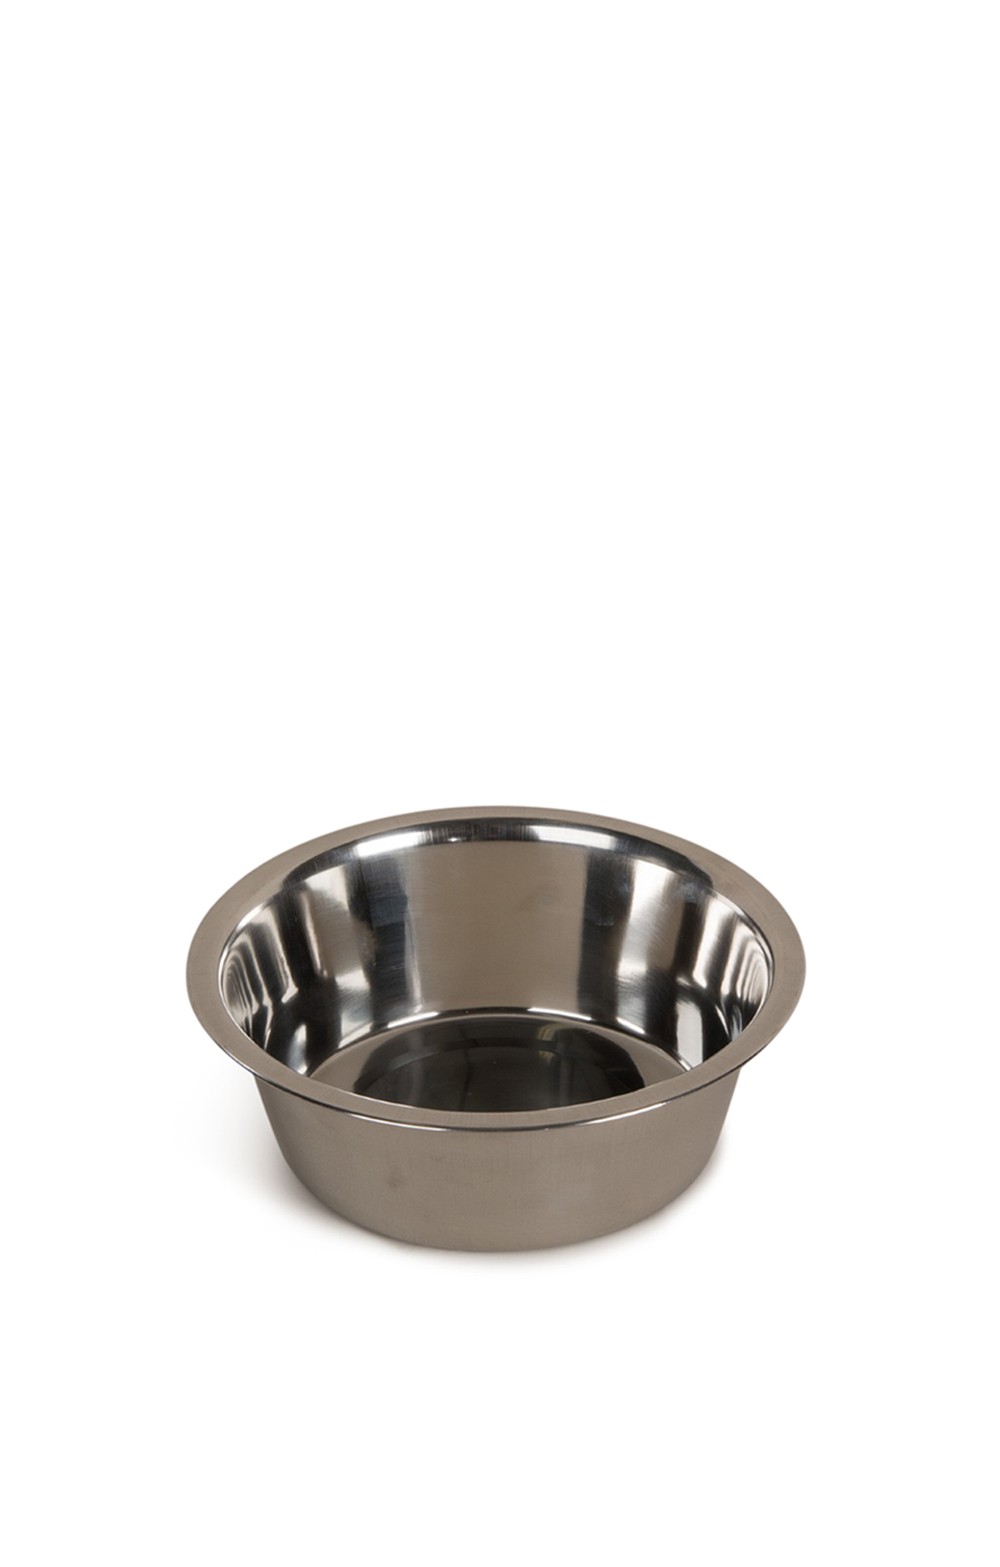  Small Stainless Steel Non-Slip Dog Bowl